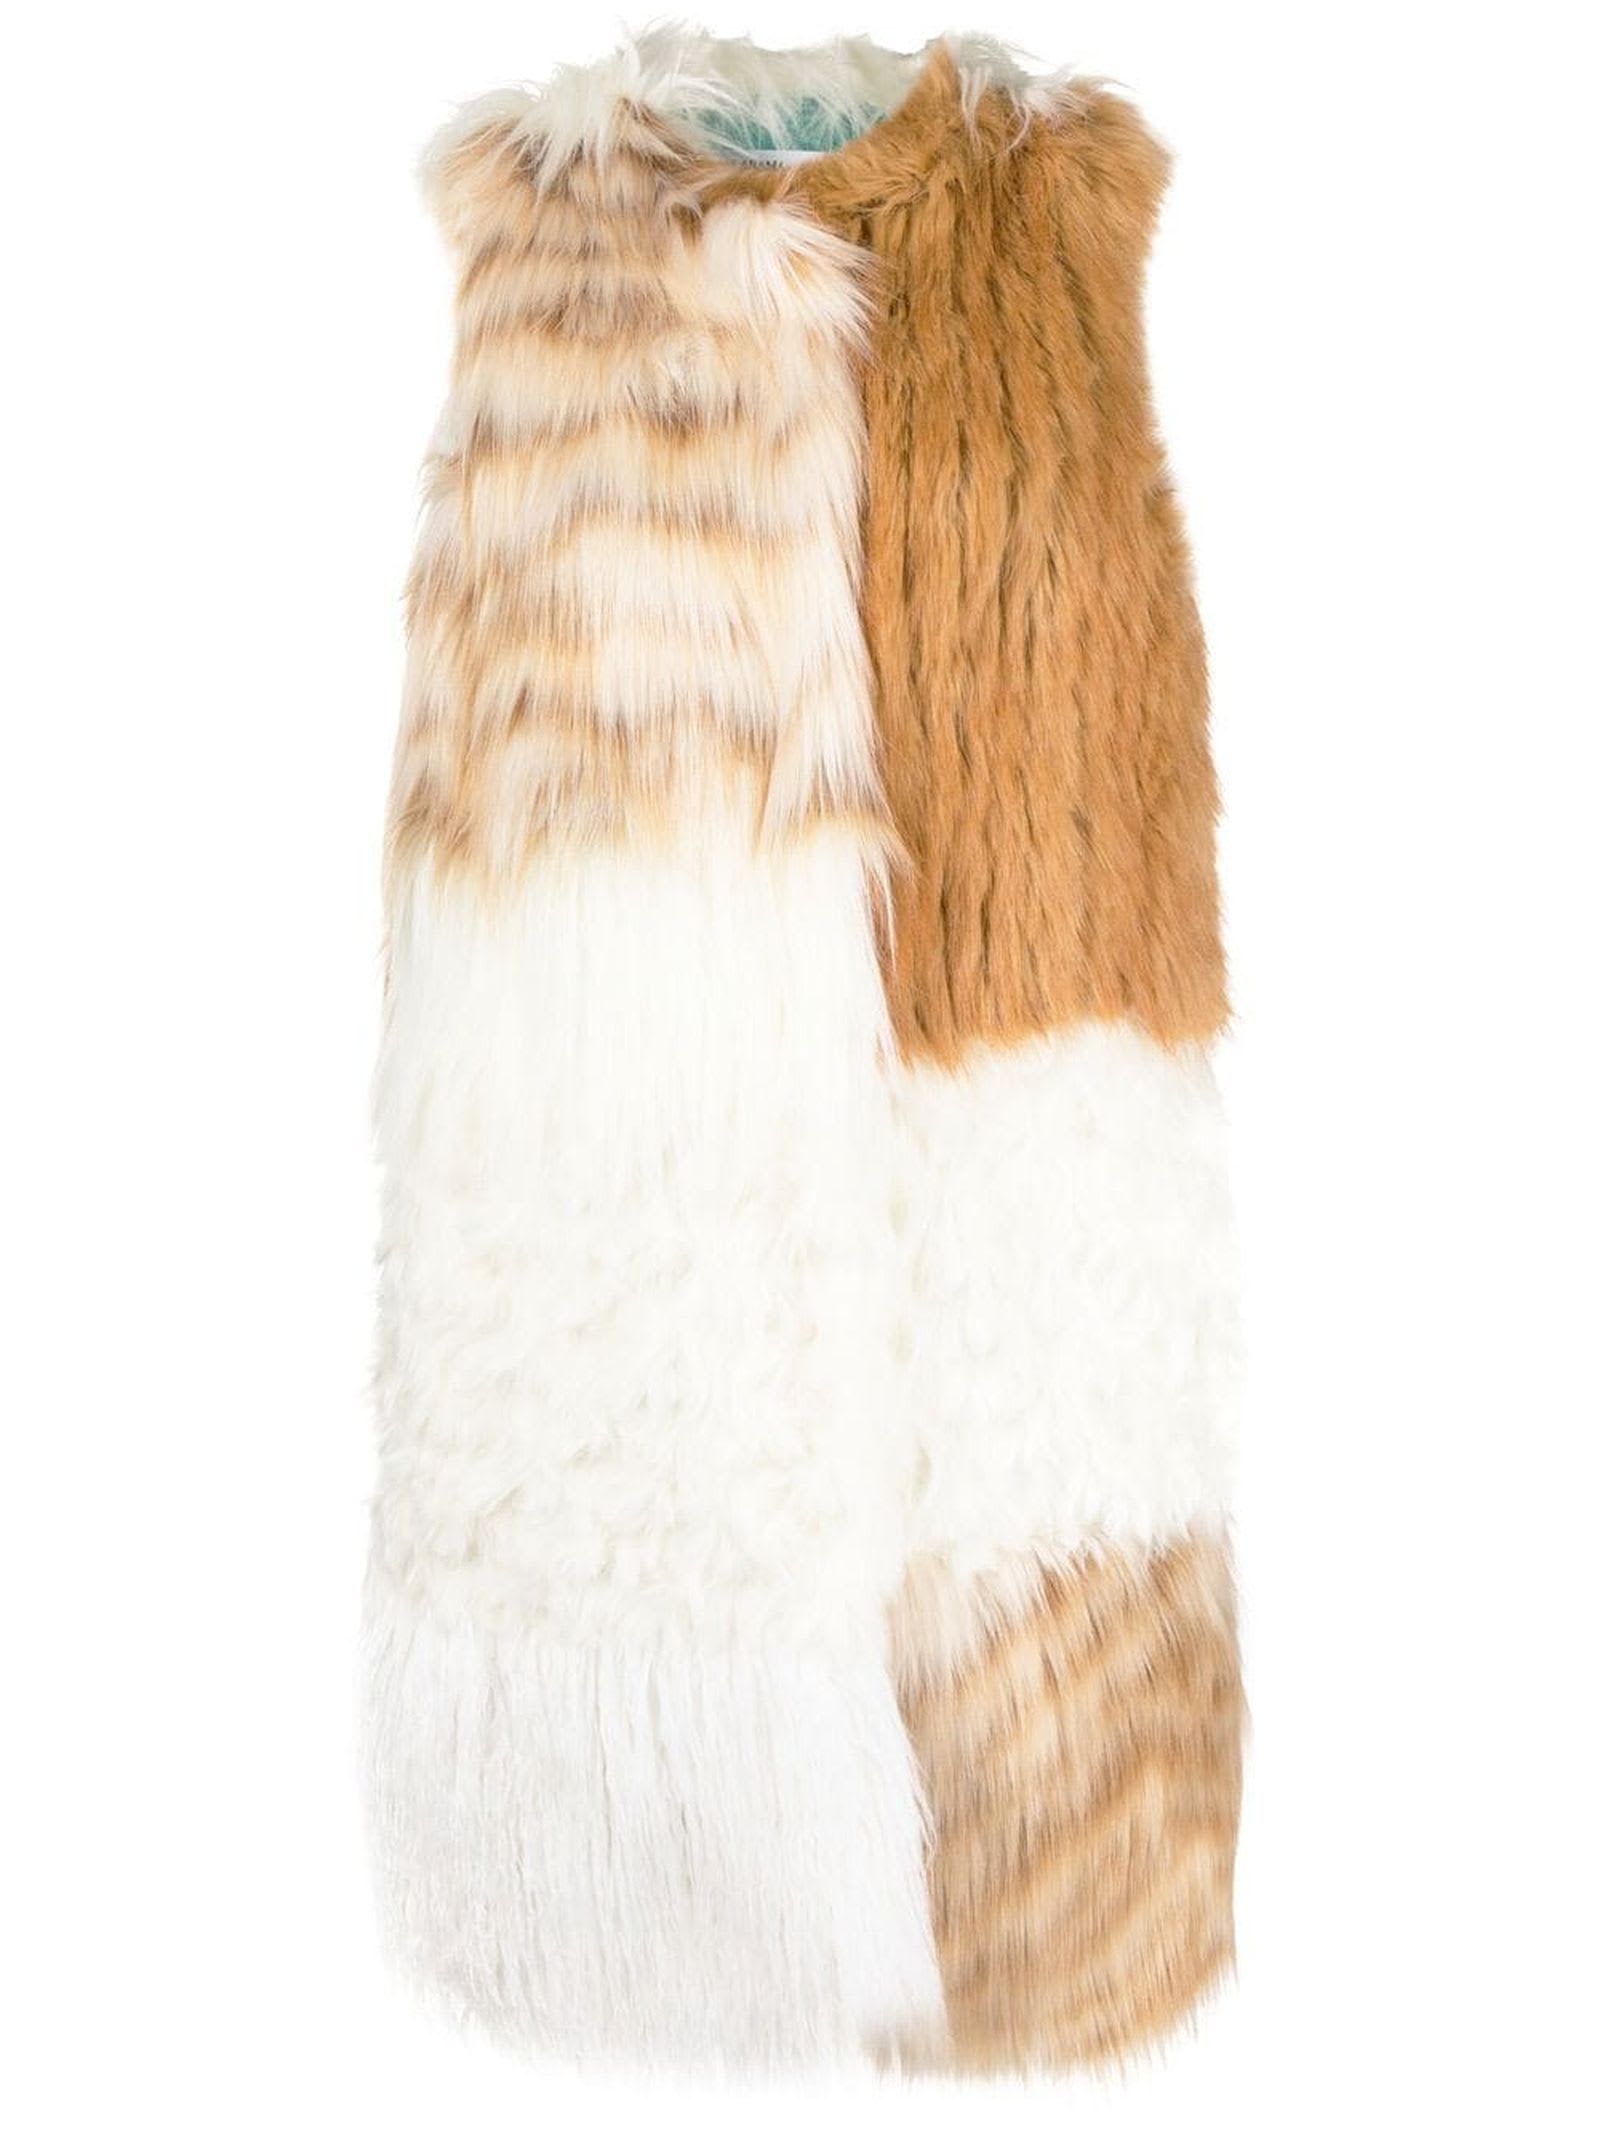 Alabama Muse Beige And White Faux Fur Gilet